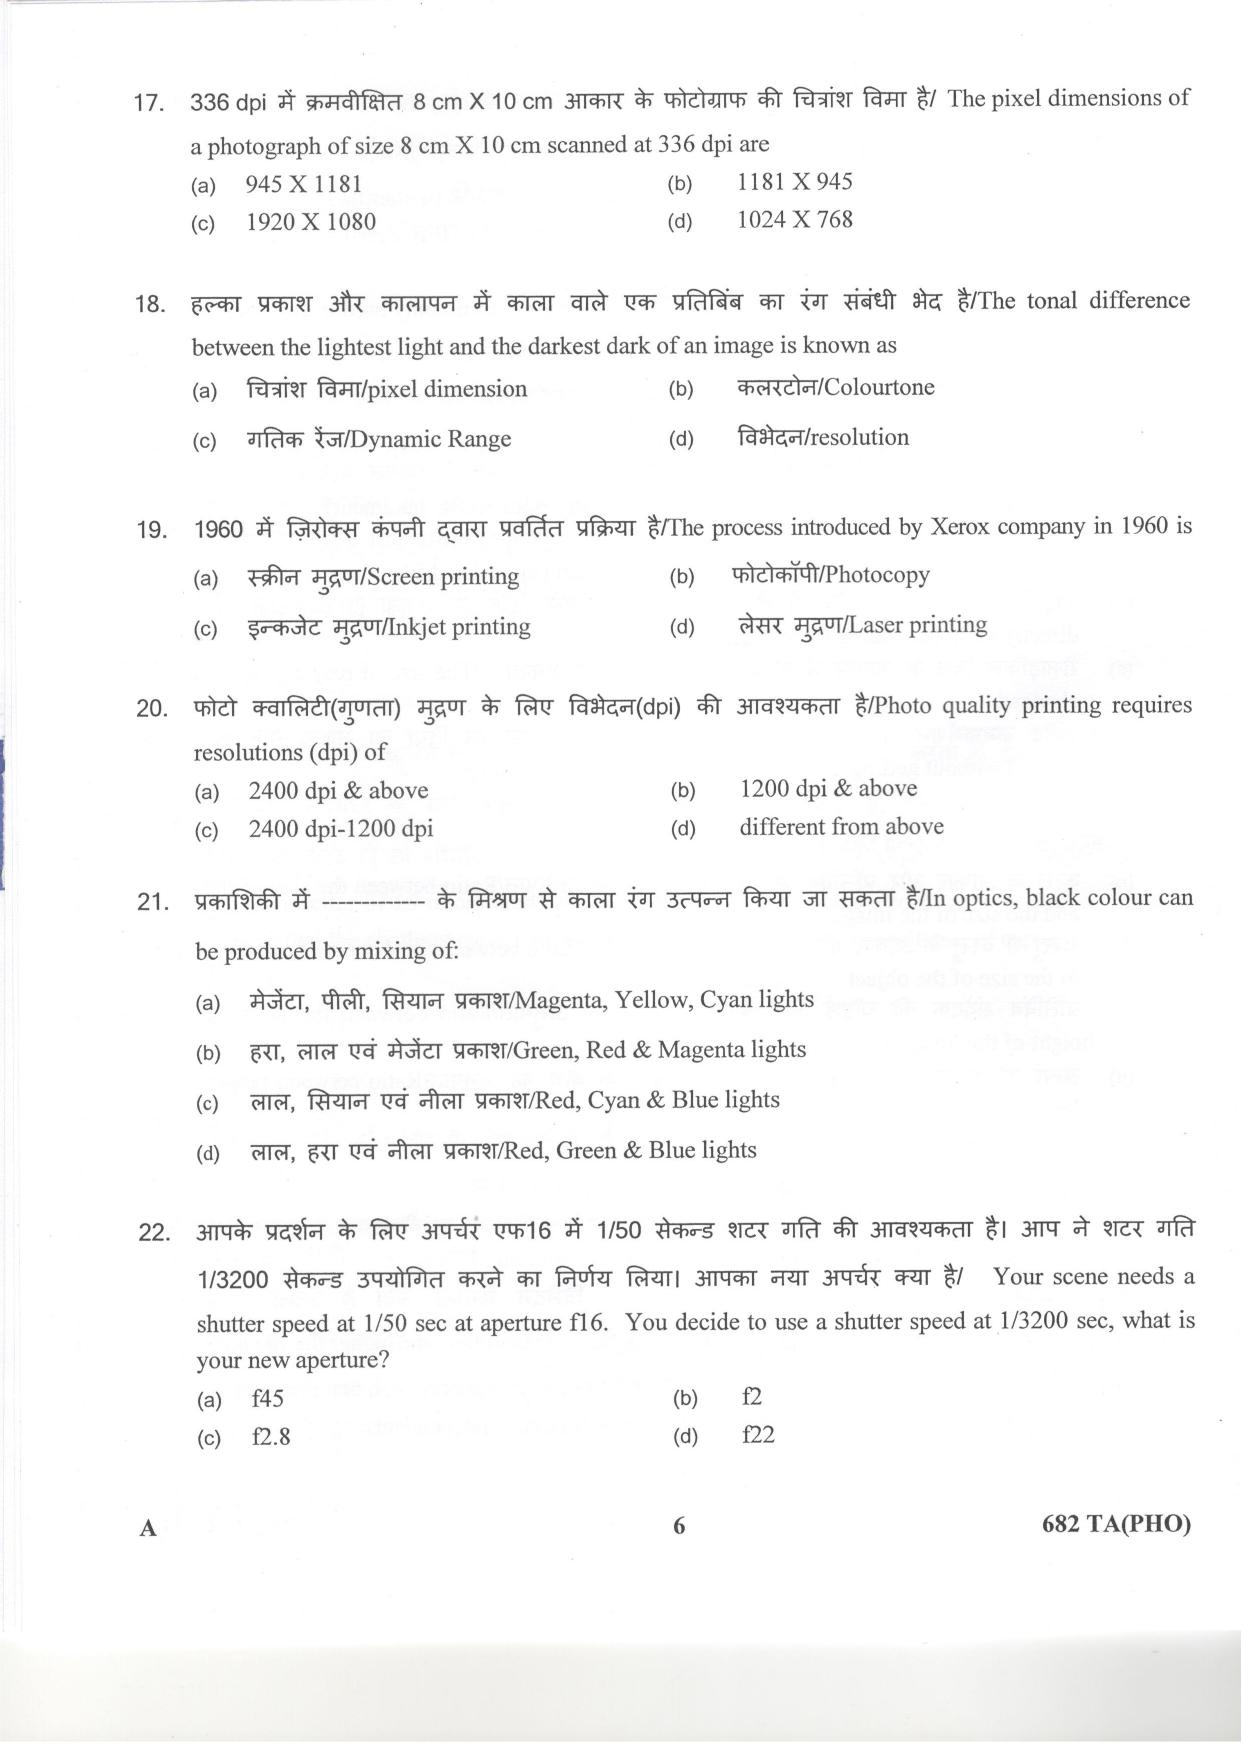 LPSC Technical Assistant (Photography) 2018 Question Paper - Page 6